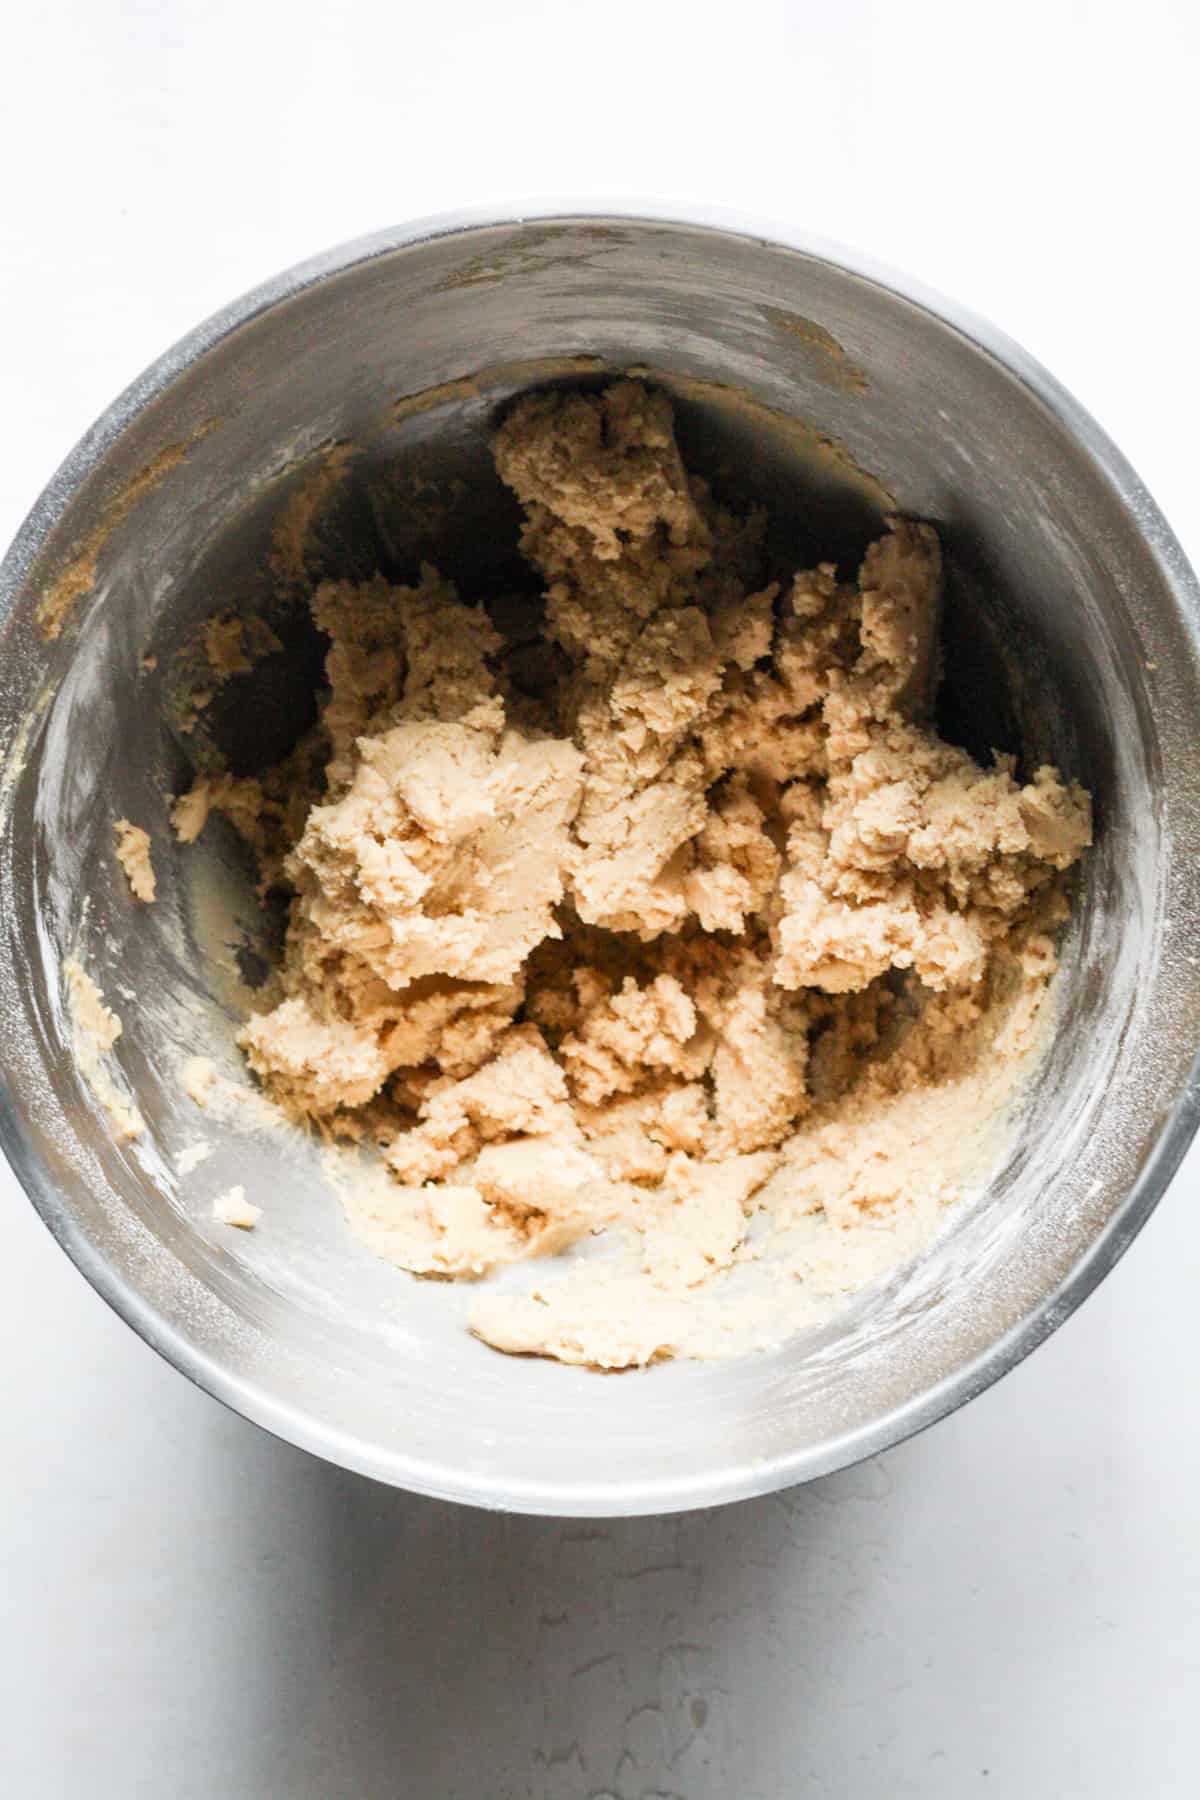 Really thick cookie dough in bowl